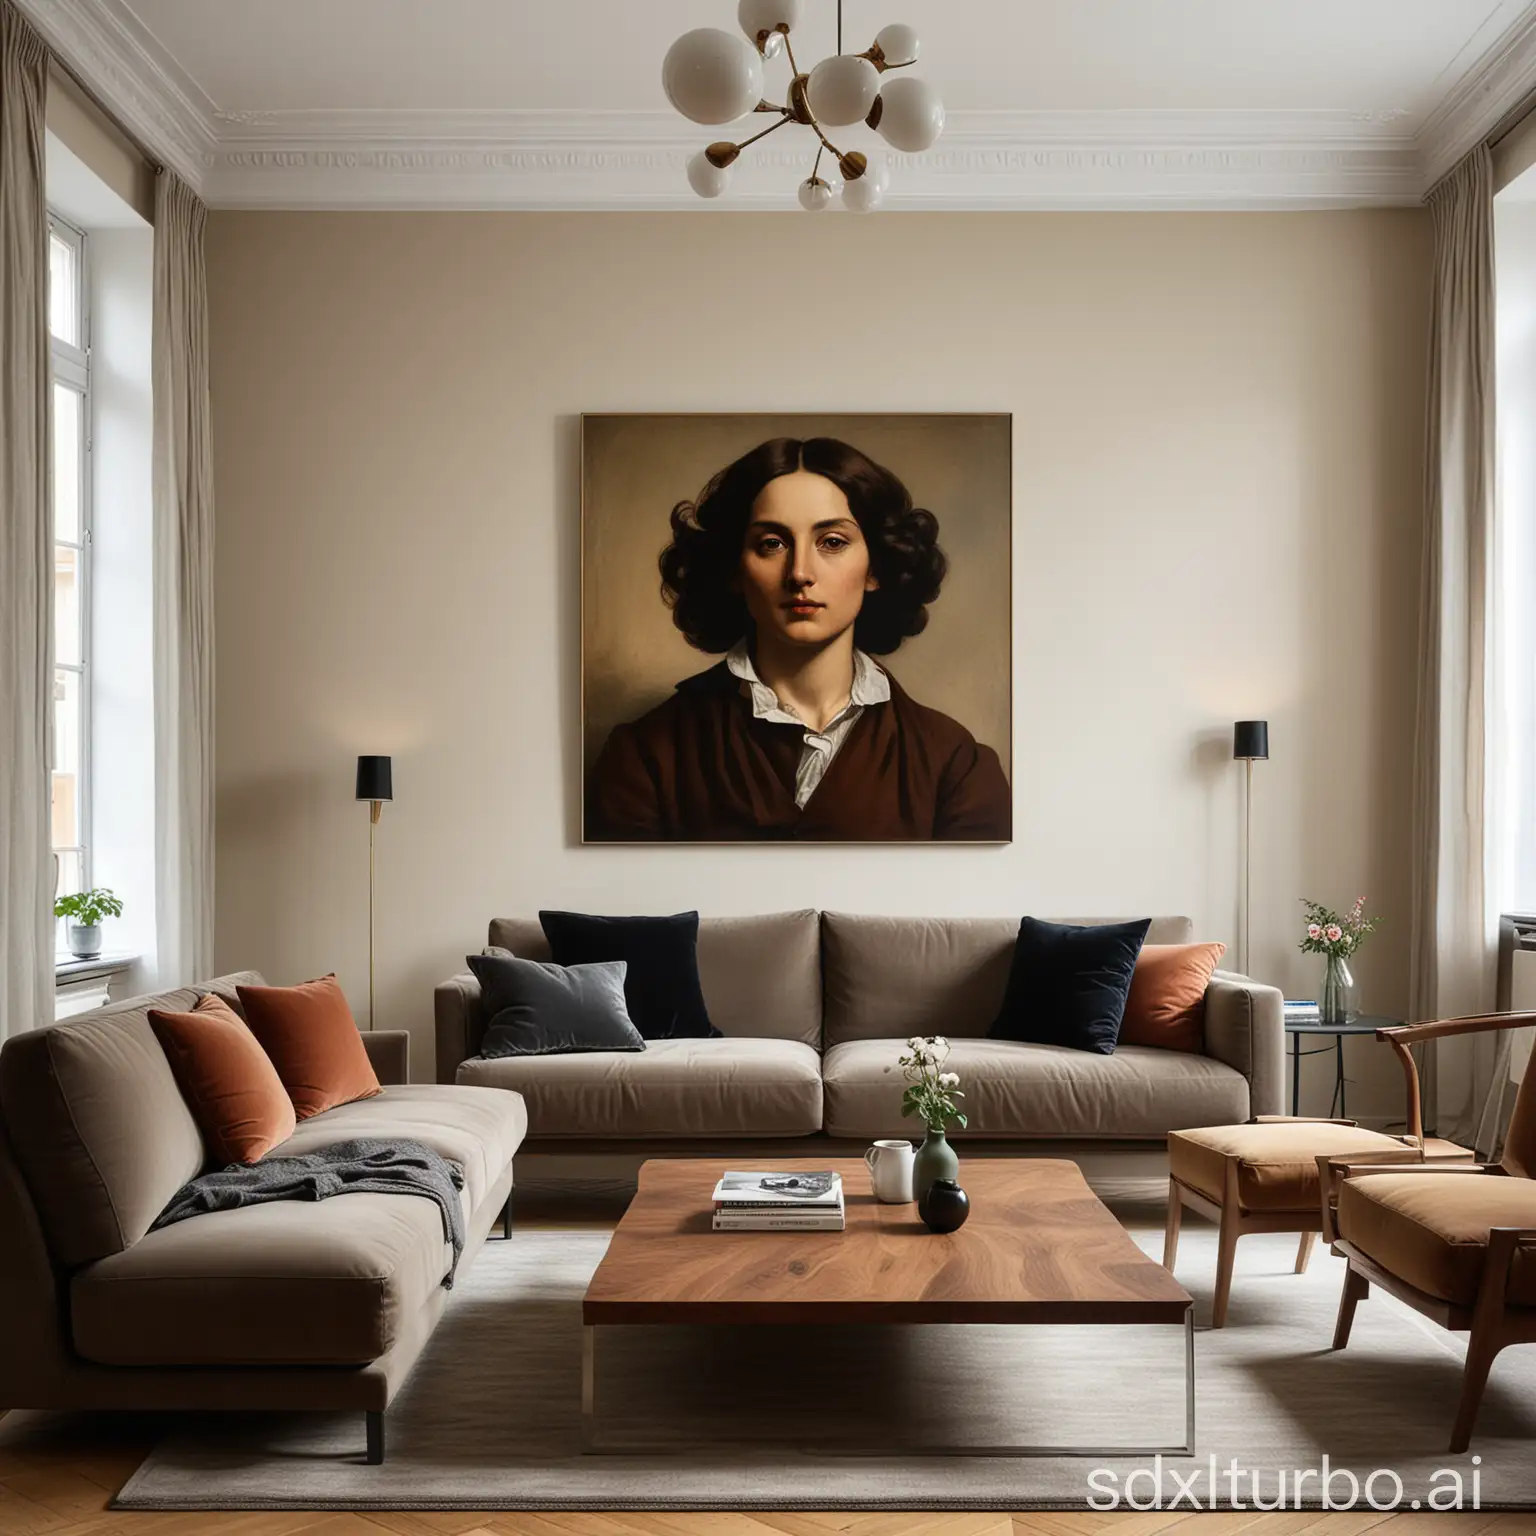 cosy elegant modern berlin apartment livingroom, modern design furniture, art by Gustave Courbet on the wall